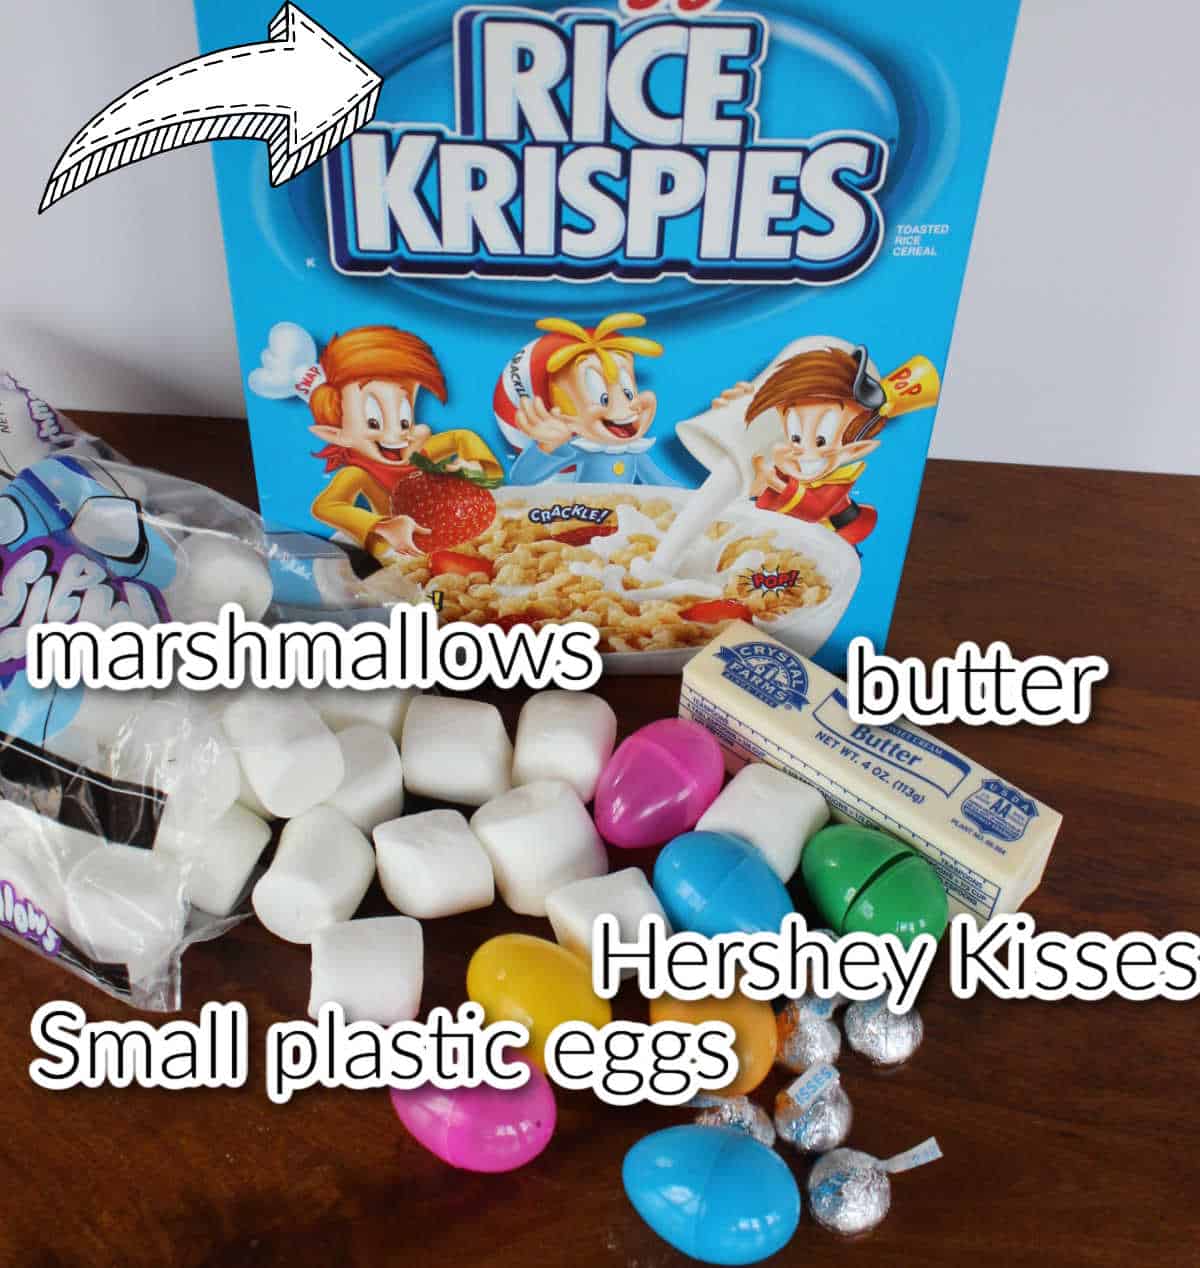 Ingredients for Easter egg treats including Rice Krispie treat cereal, marshmallows, butter, Hershey Kisses, plastic eggs.